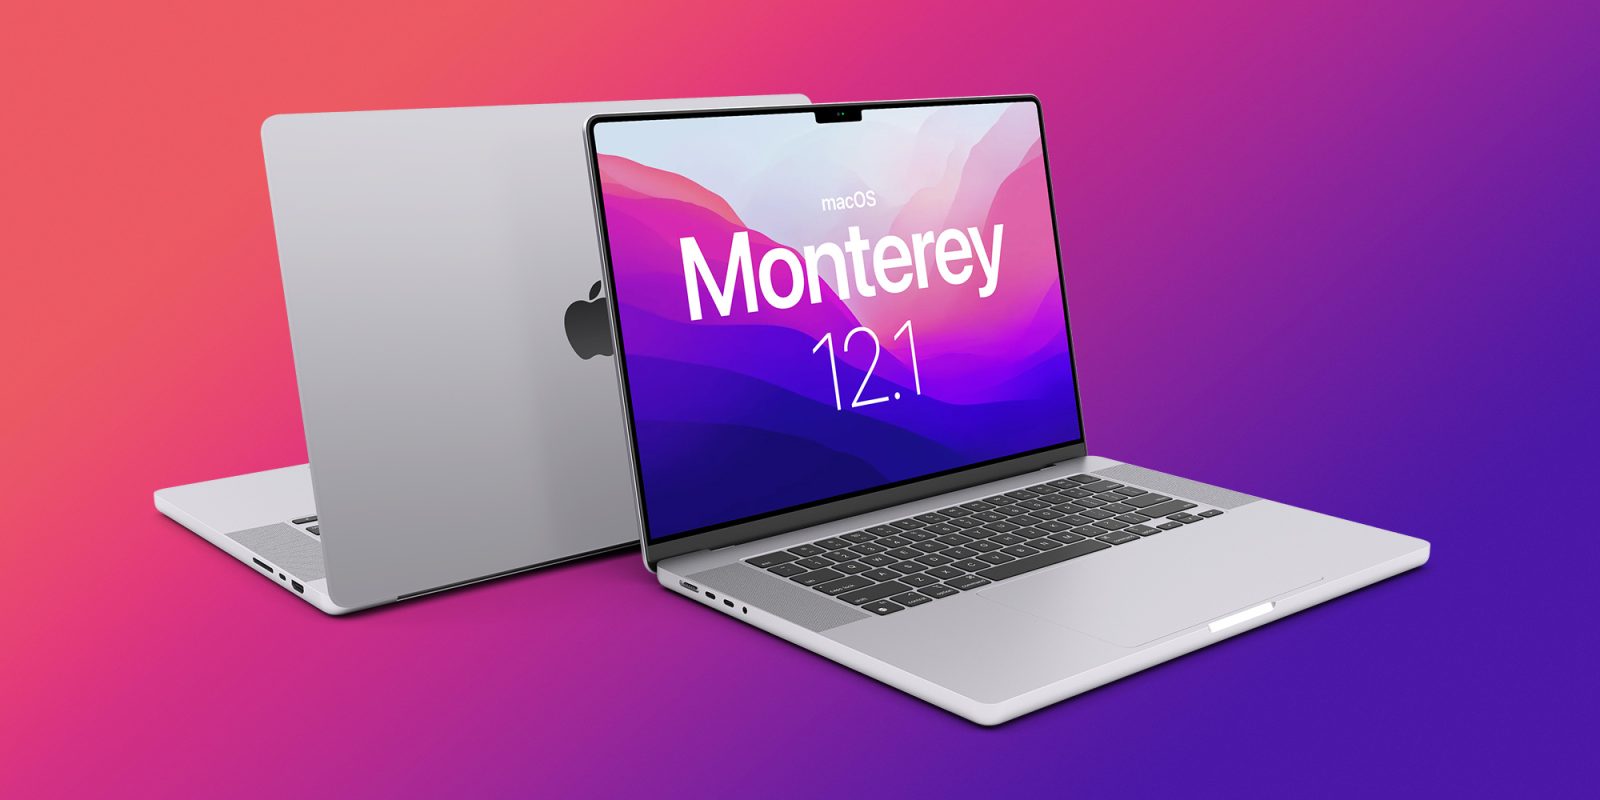 SharePlay is presently accessible on Macs as part of the most recent macOS Monterey update